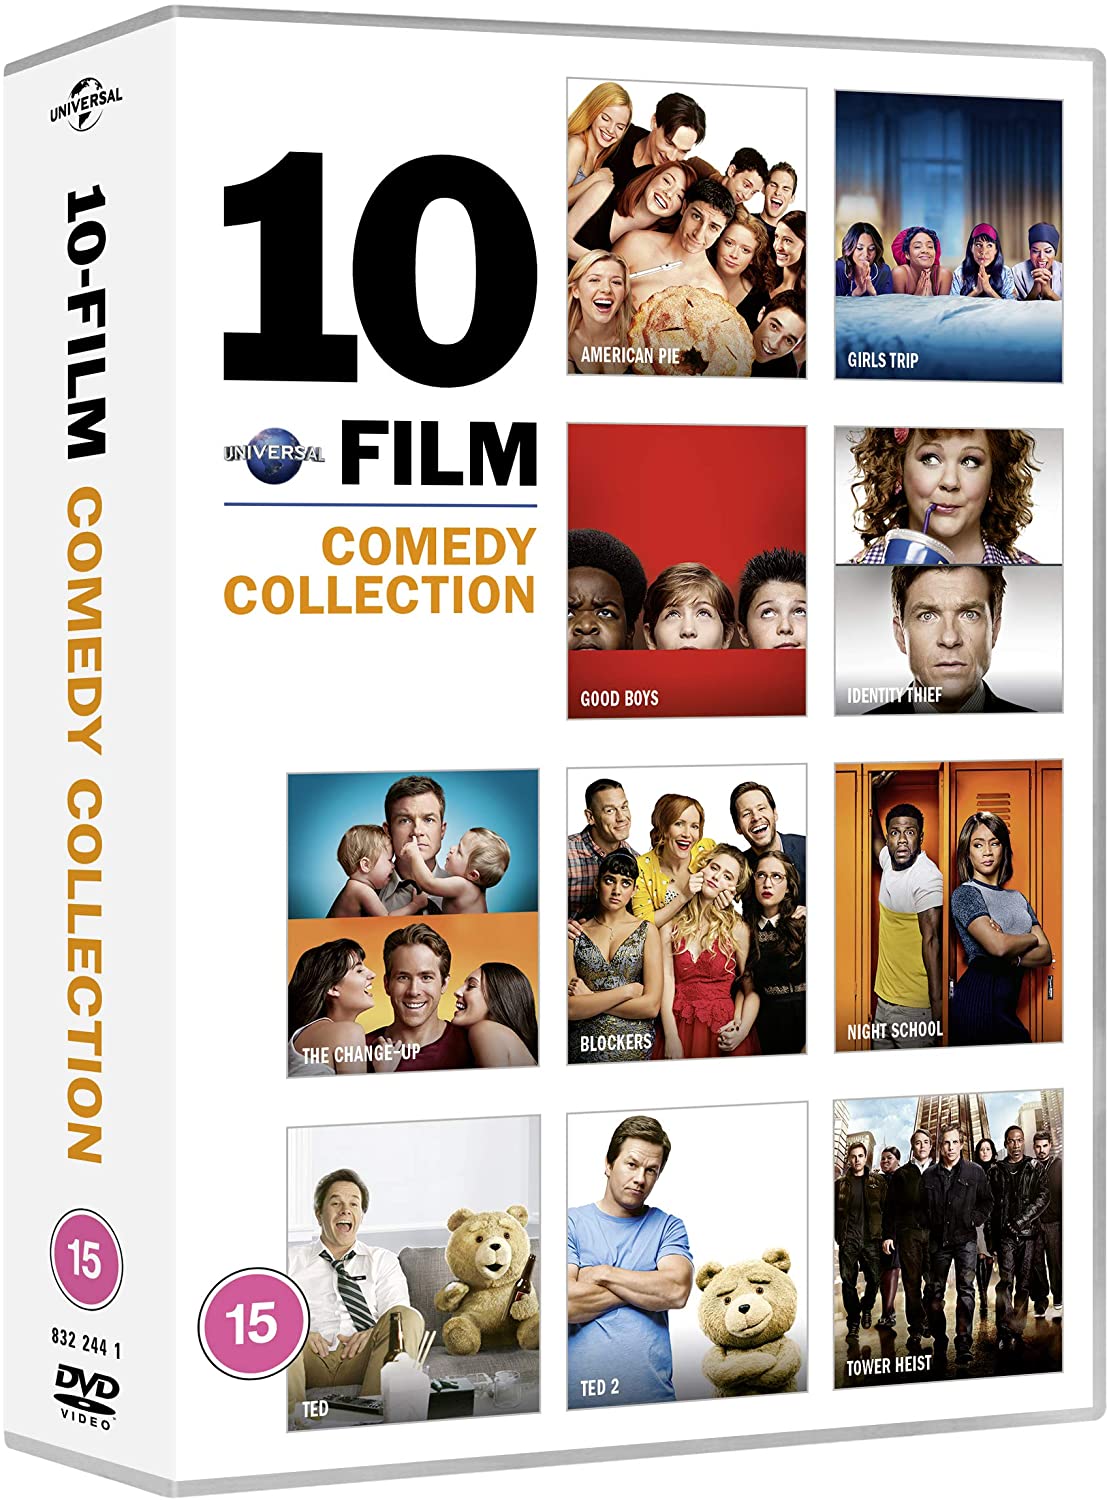 Universal 10 Comedy Film Collection (DVD)